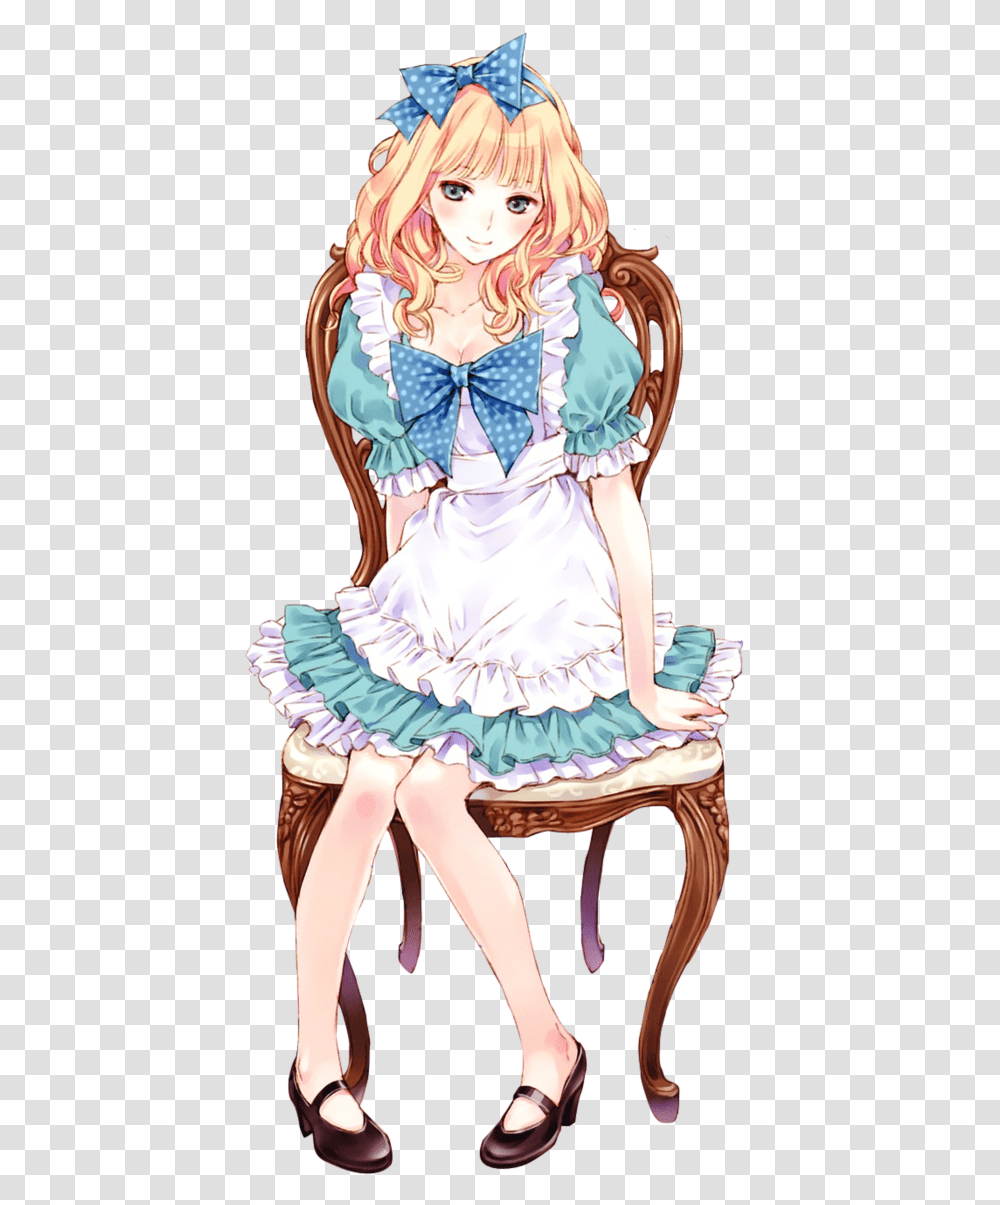 Alice In Wonderland Anime 3 Image Anime Alice In Wonderland, Performer, Person, Clothing, Dance Pose Transparent Png